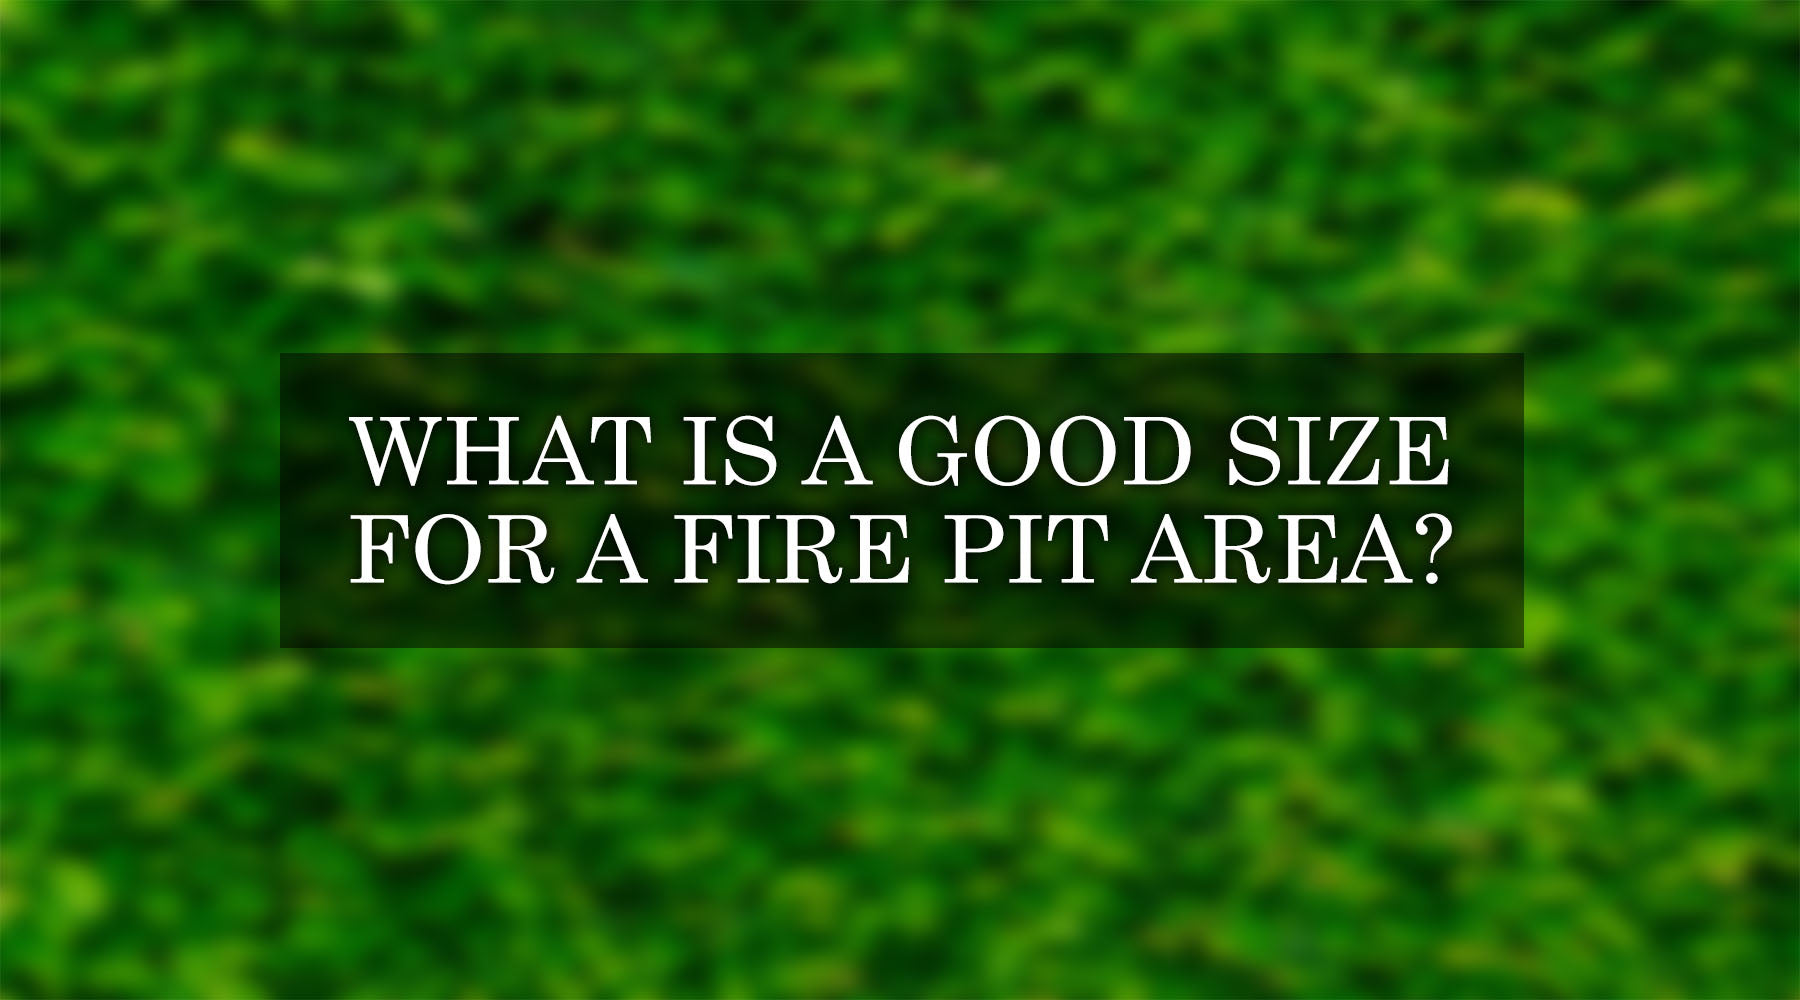 What is a Good Size for a Fire Pit Area?